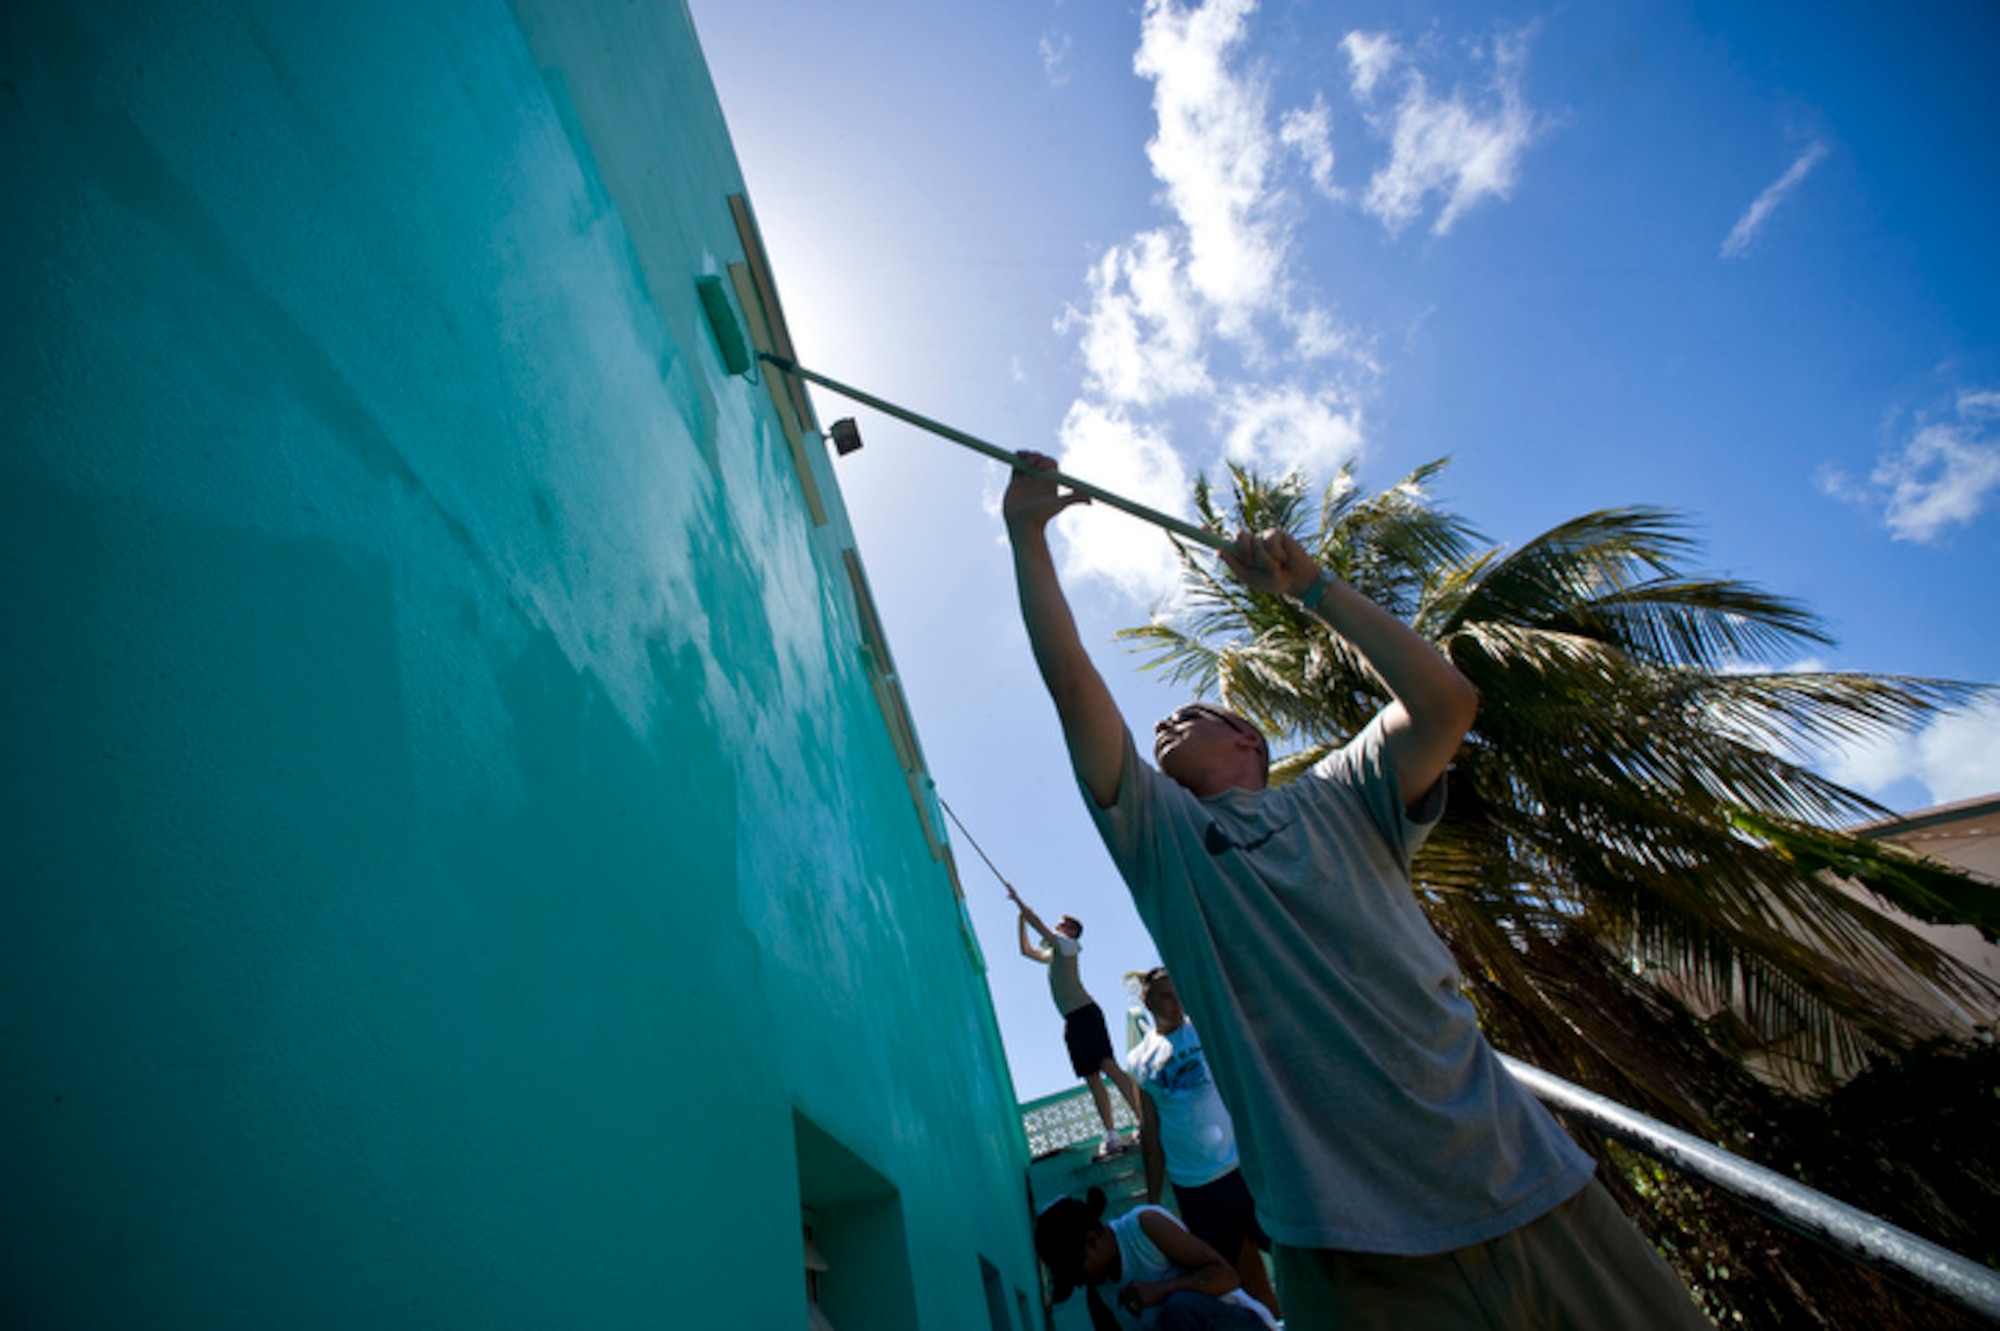 AirmEn of Operation Southern Partner spenD the day painting the 13-classrom exterior of the Stella Maris School for the Physically Disabled June 8 in Belize City, Belize. The operation is meant to enhance the spirit of cooperation between the two countries. (U.S. Air Force photo/Staff Sgt. Bennie J. Davis III)